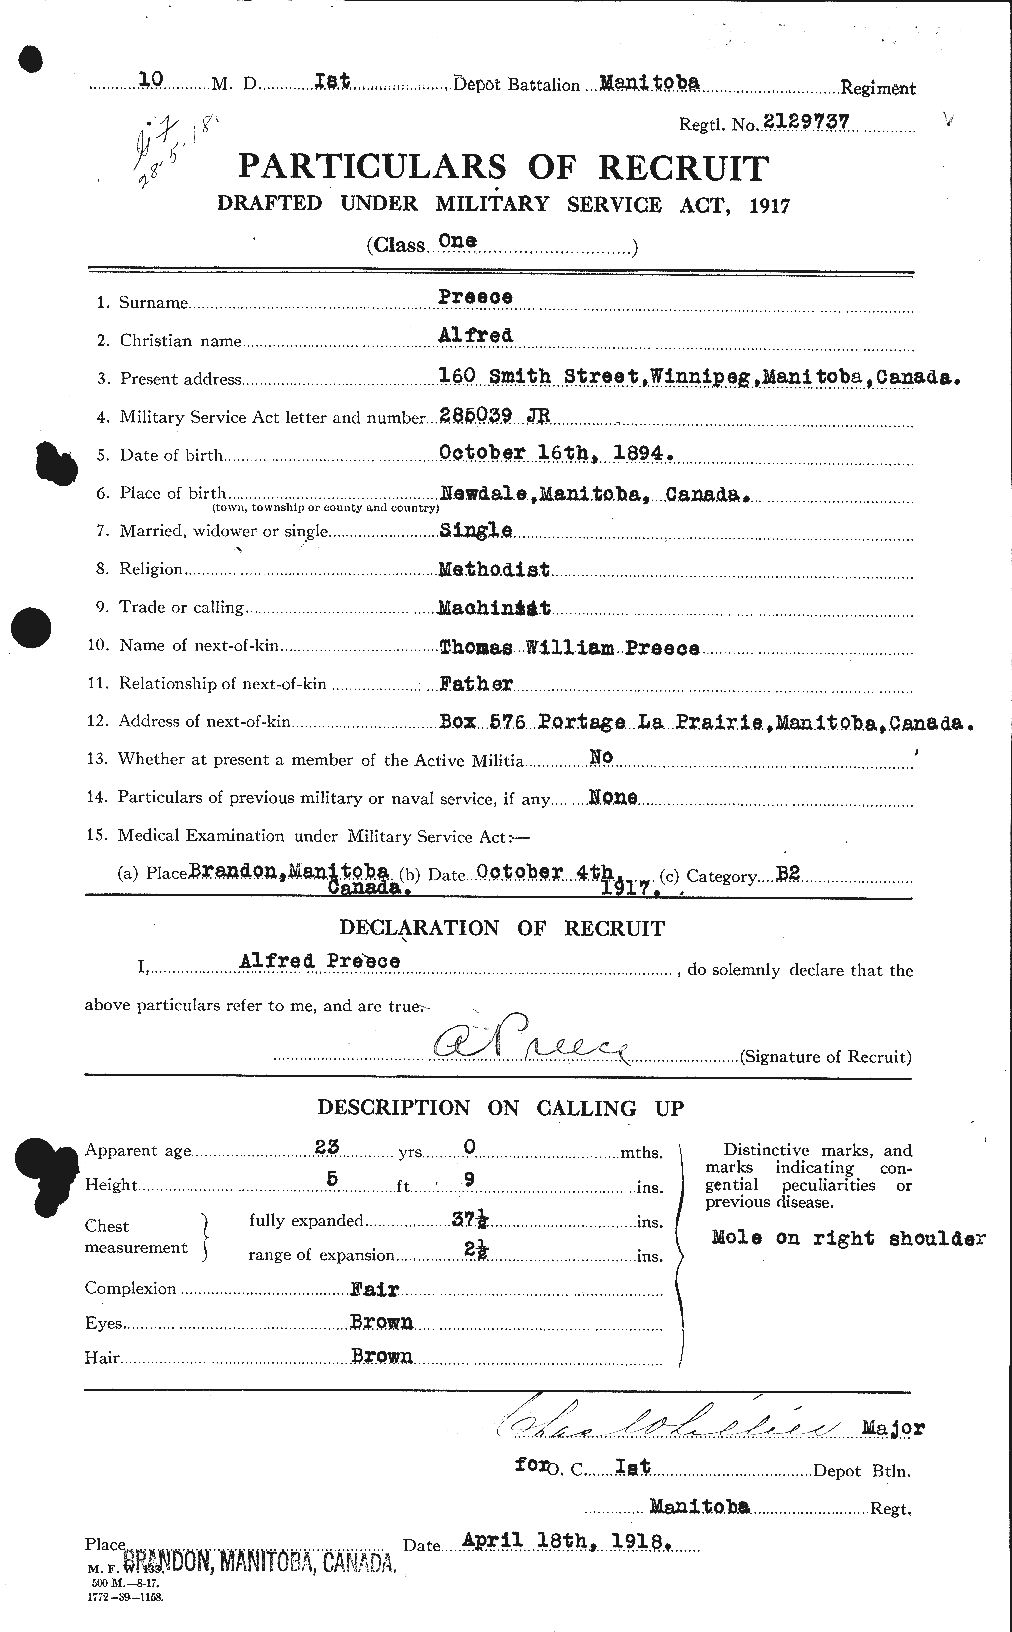 Personnel Records of the First World War - CEF 588362a